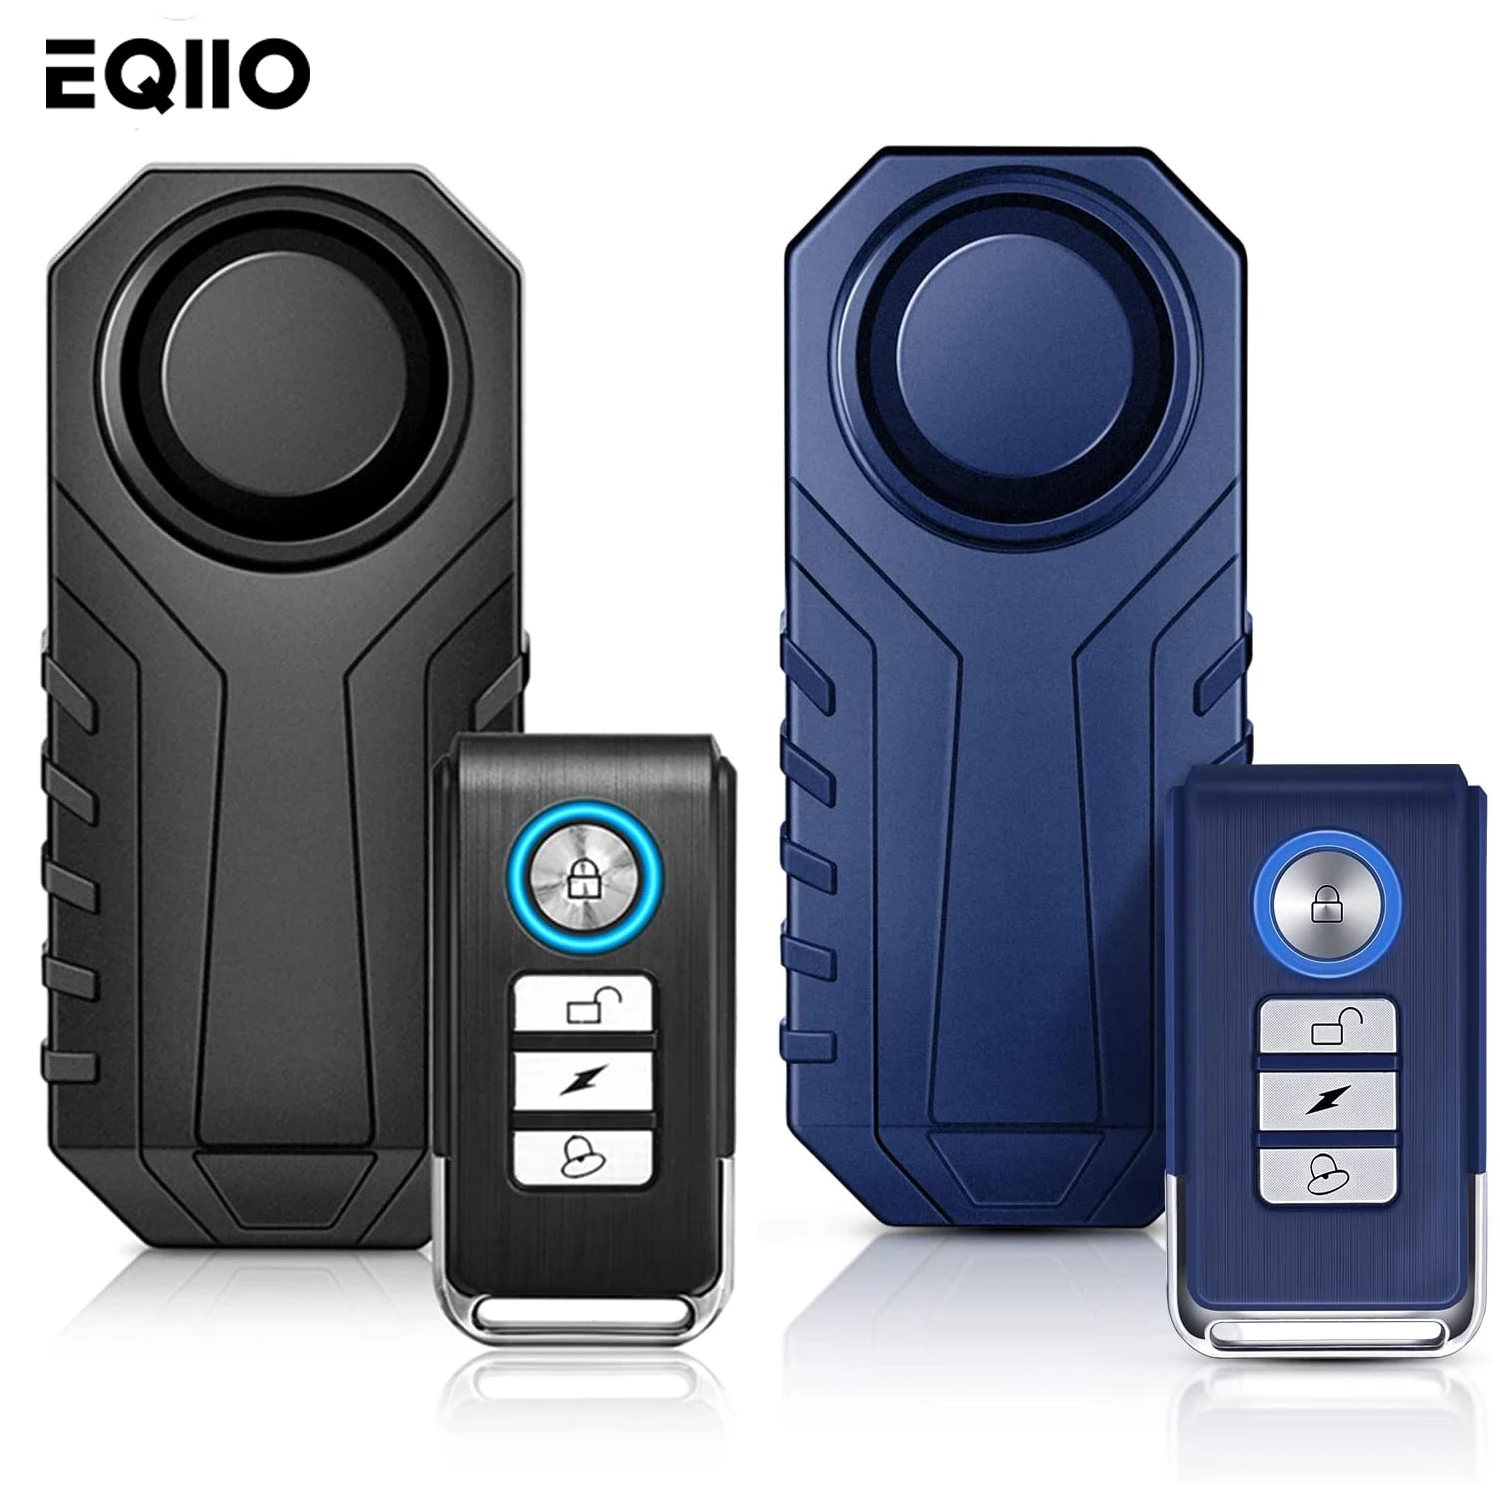 Eqiio Bicycle Motorbike Alarm Bell 113dB Electric Bike Security Anti Theft Wireless Remote Control Vibration Detector